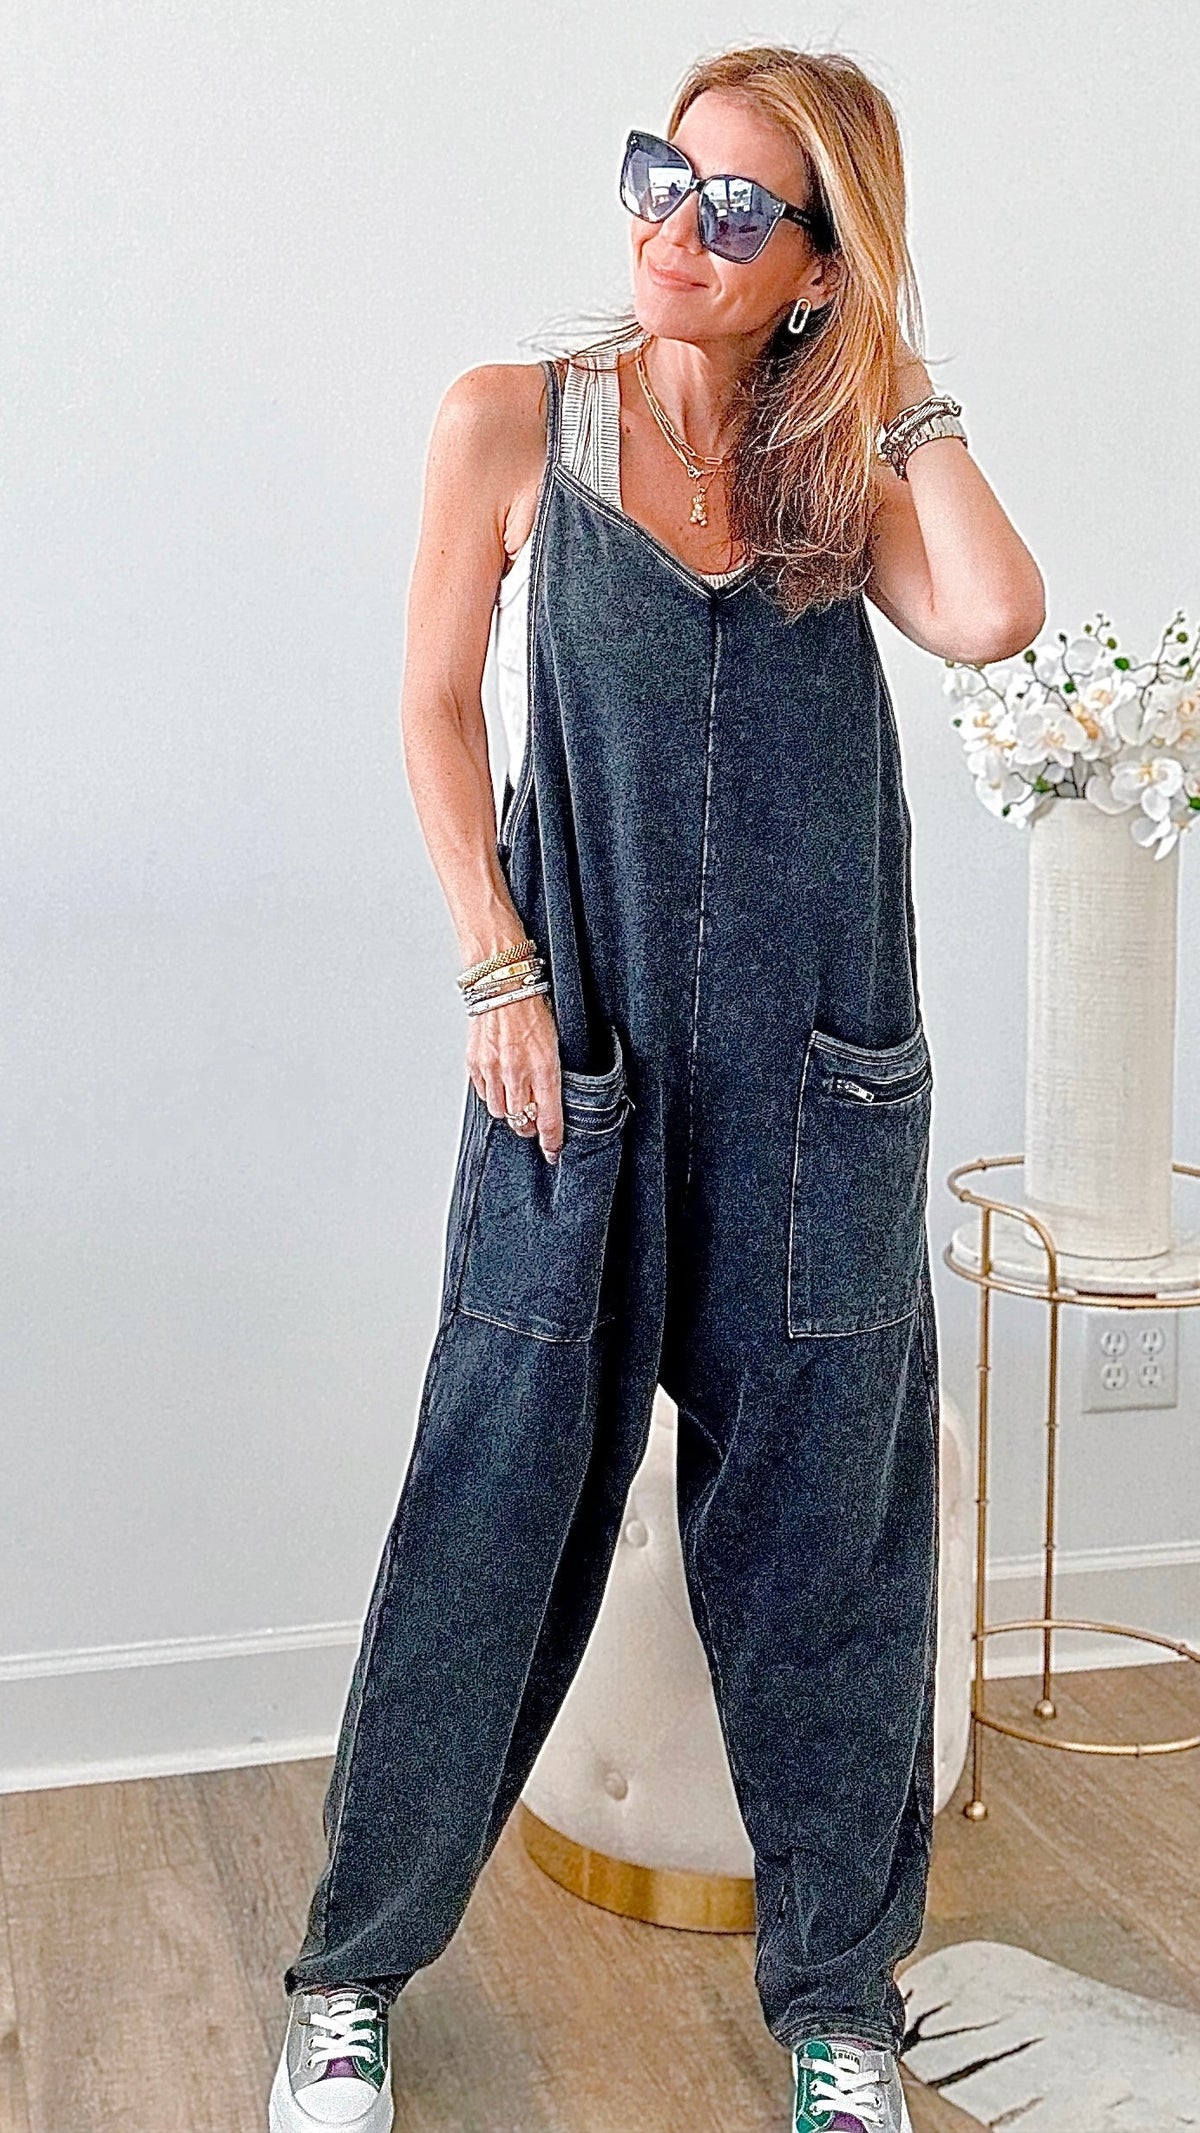 Ces Femme Mineral Washed French Terry Comfy Jumpsuit